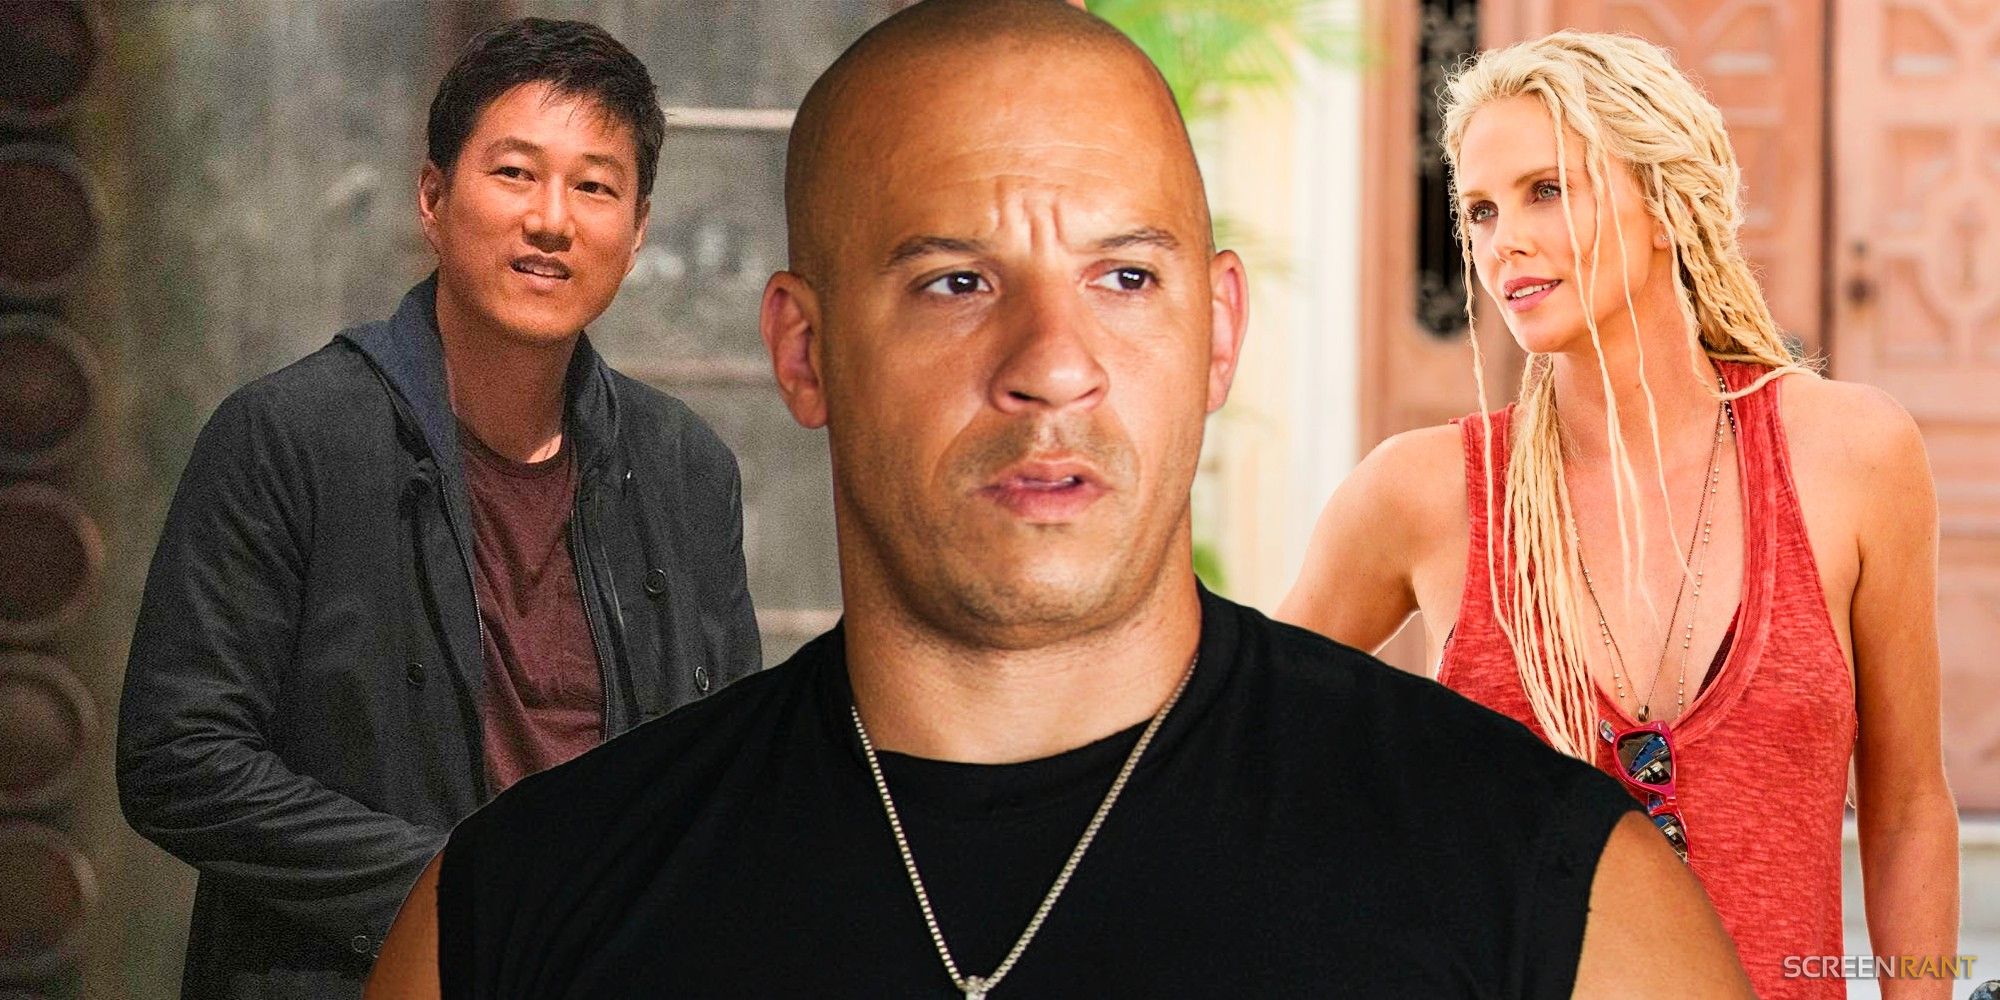 What to remember about the Fast and Furious movies before Fast X